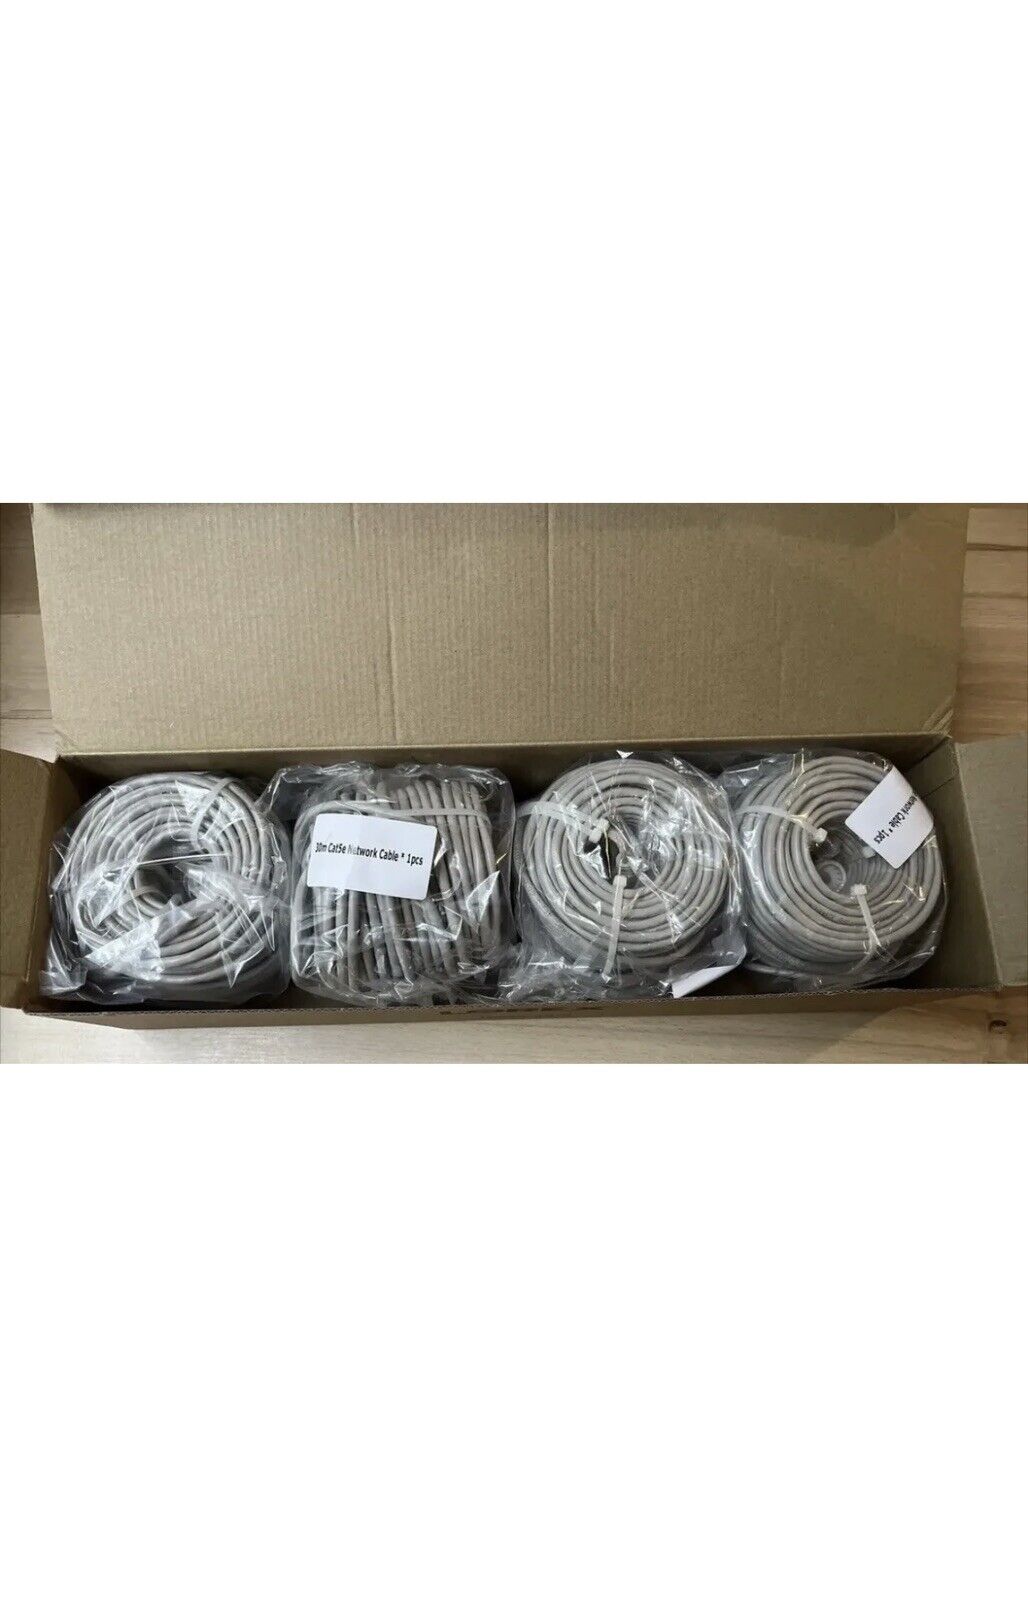 Lorex Cat5e Ethernet Network Cable GRAY 100ft (30m) 4 PACK LOT BRAND NEW SEALED